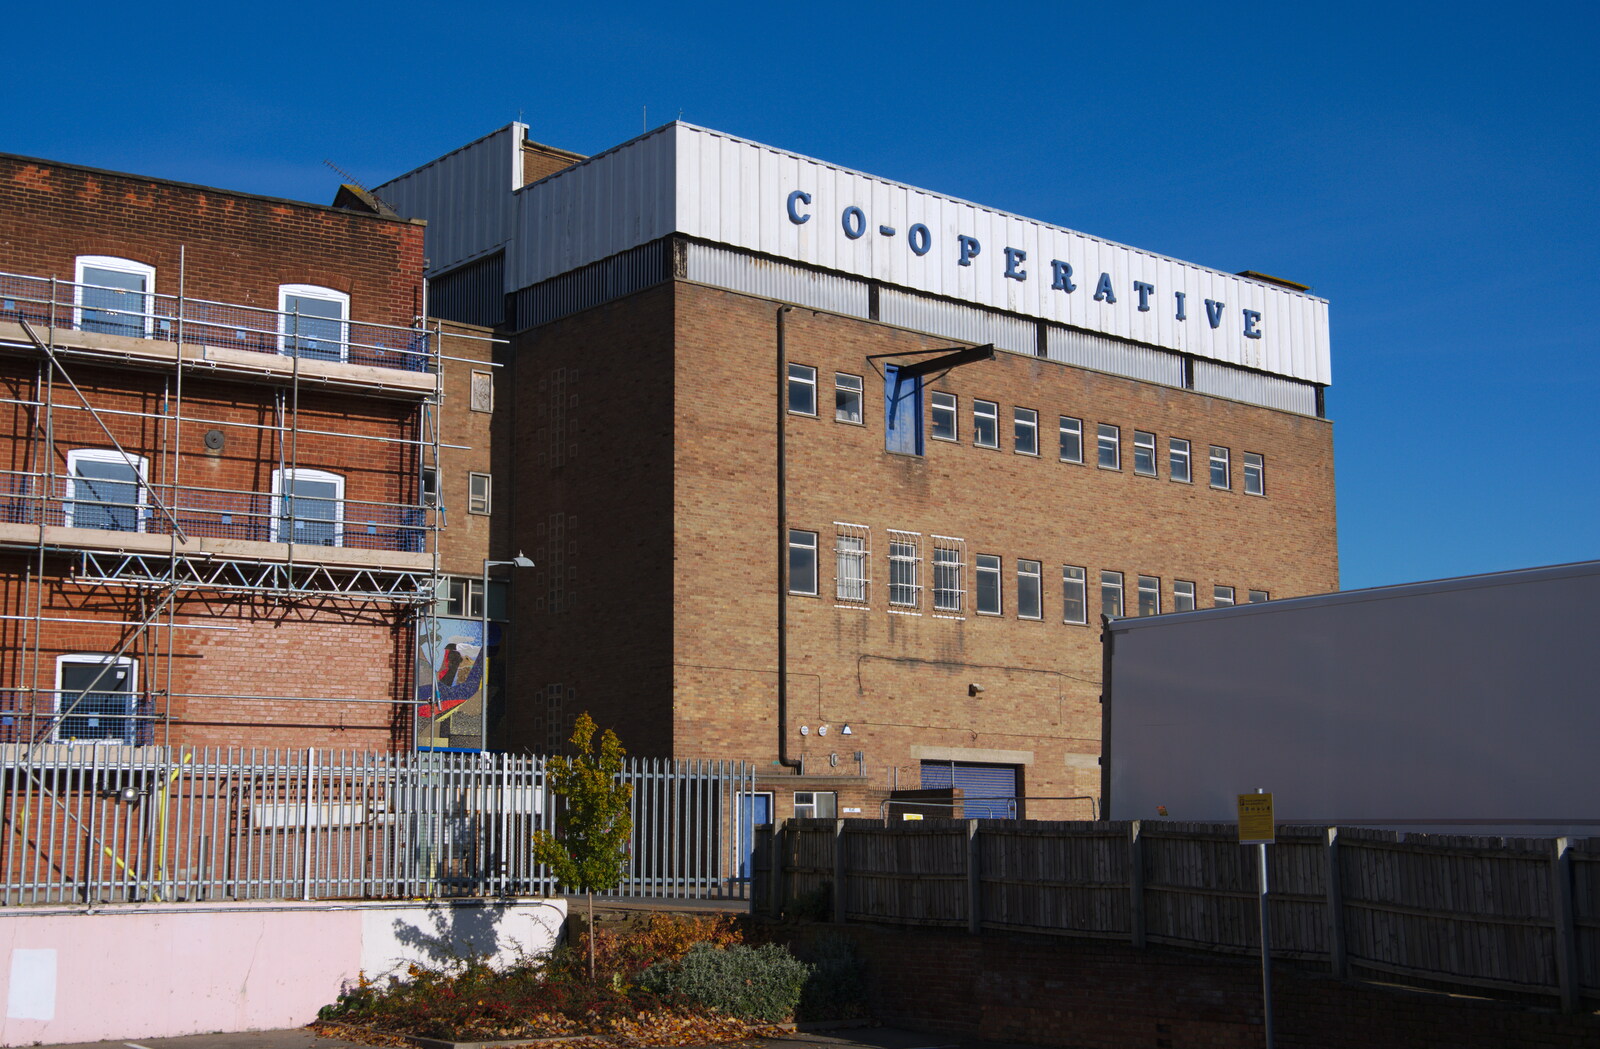 The Cooperative building from Exam Day Dereliction, Ipswich, Suffolk - 13th November 2019